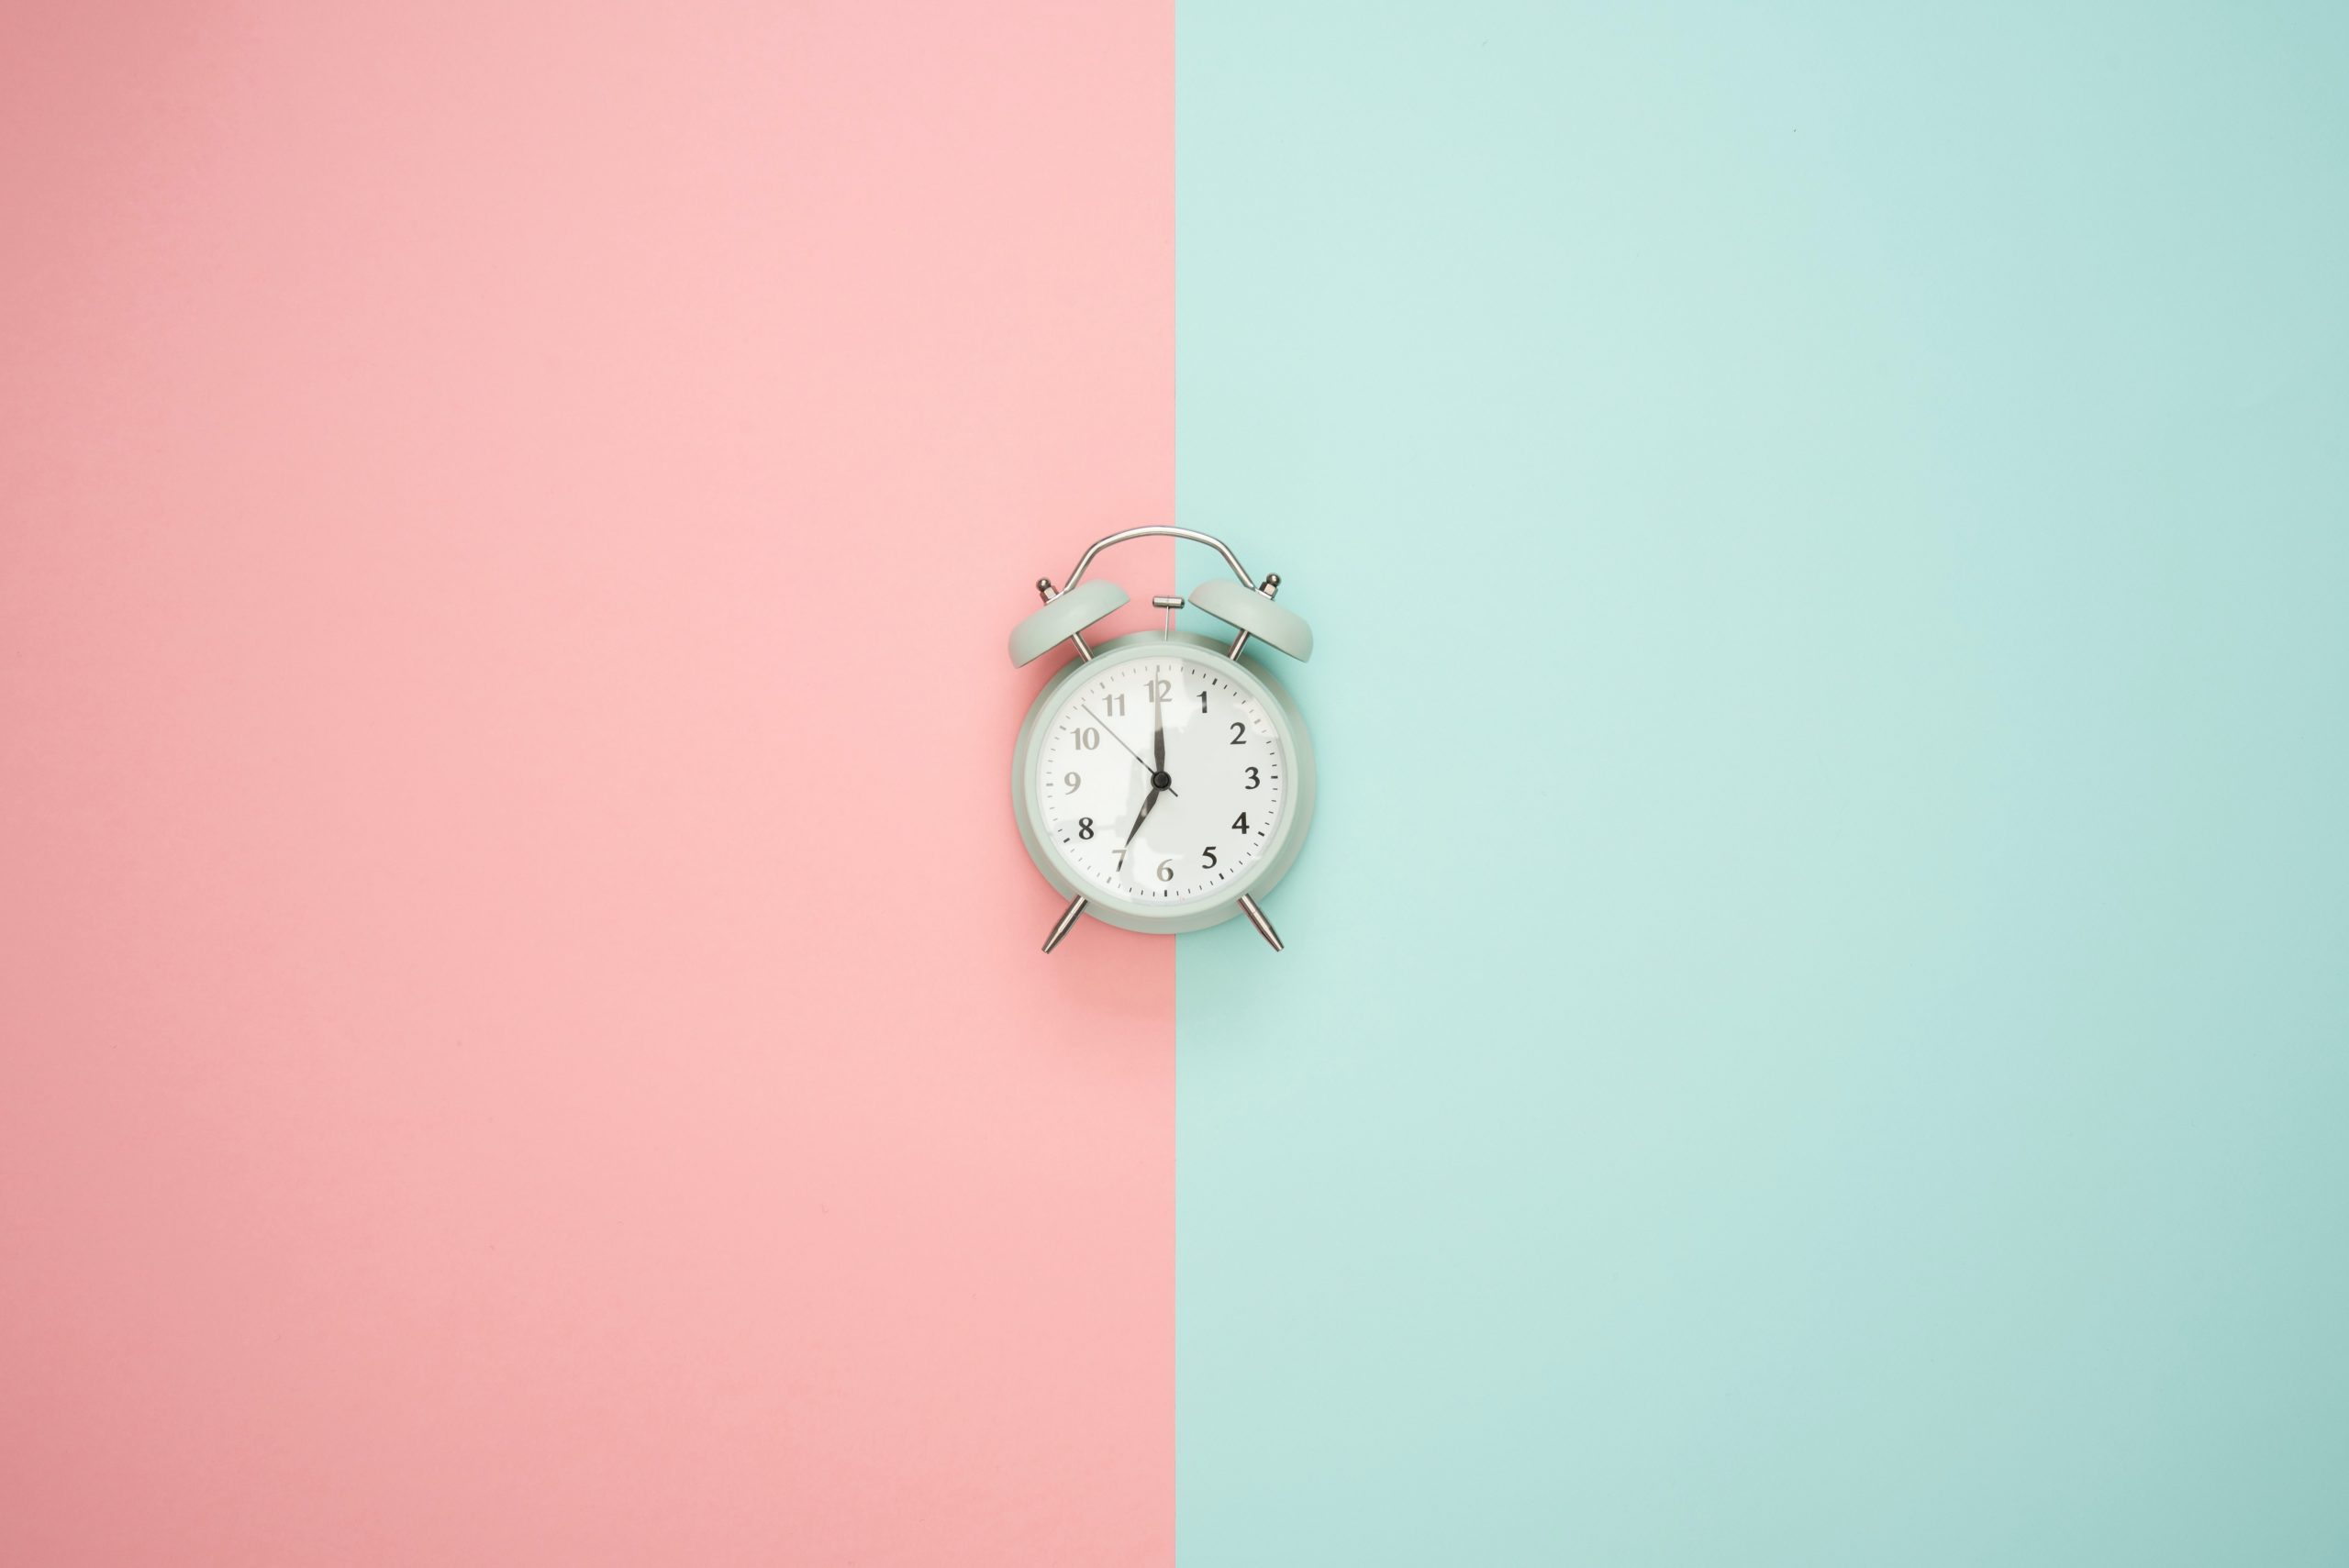 A clock in front of a two tone background split in half between pink and green.